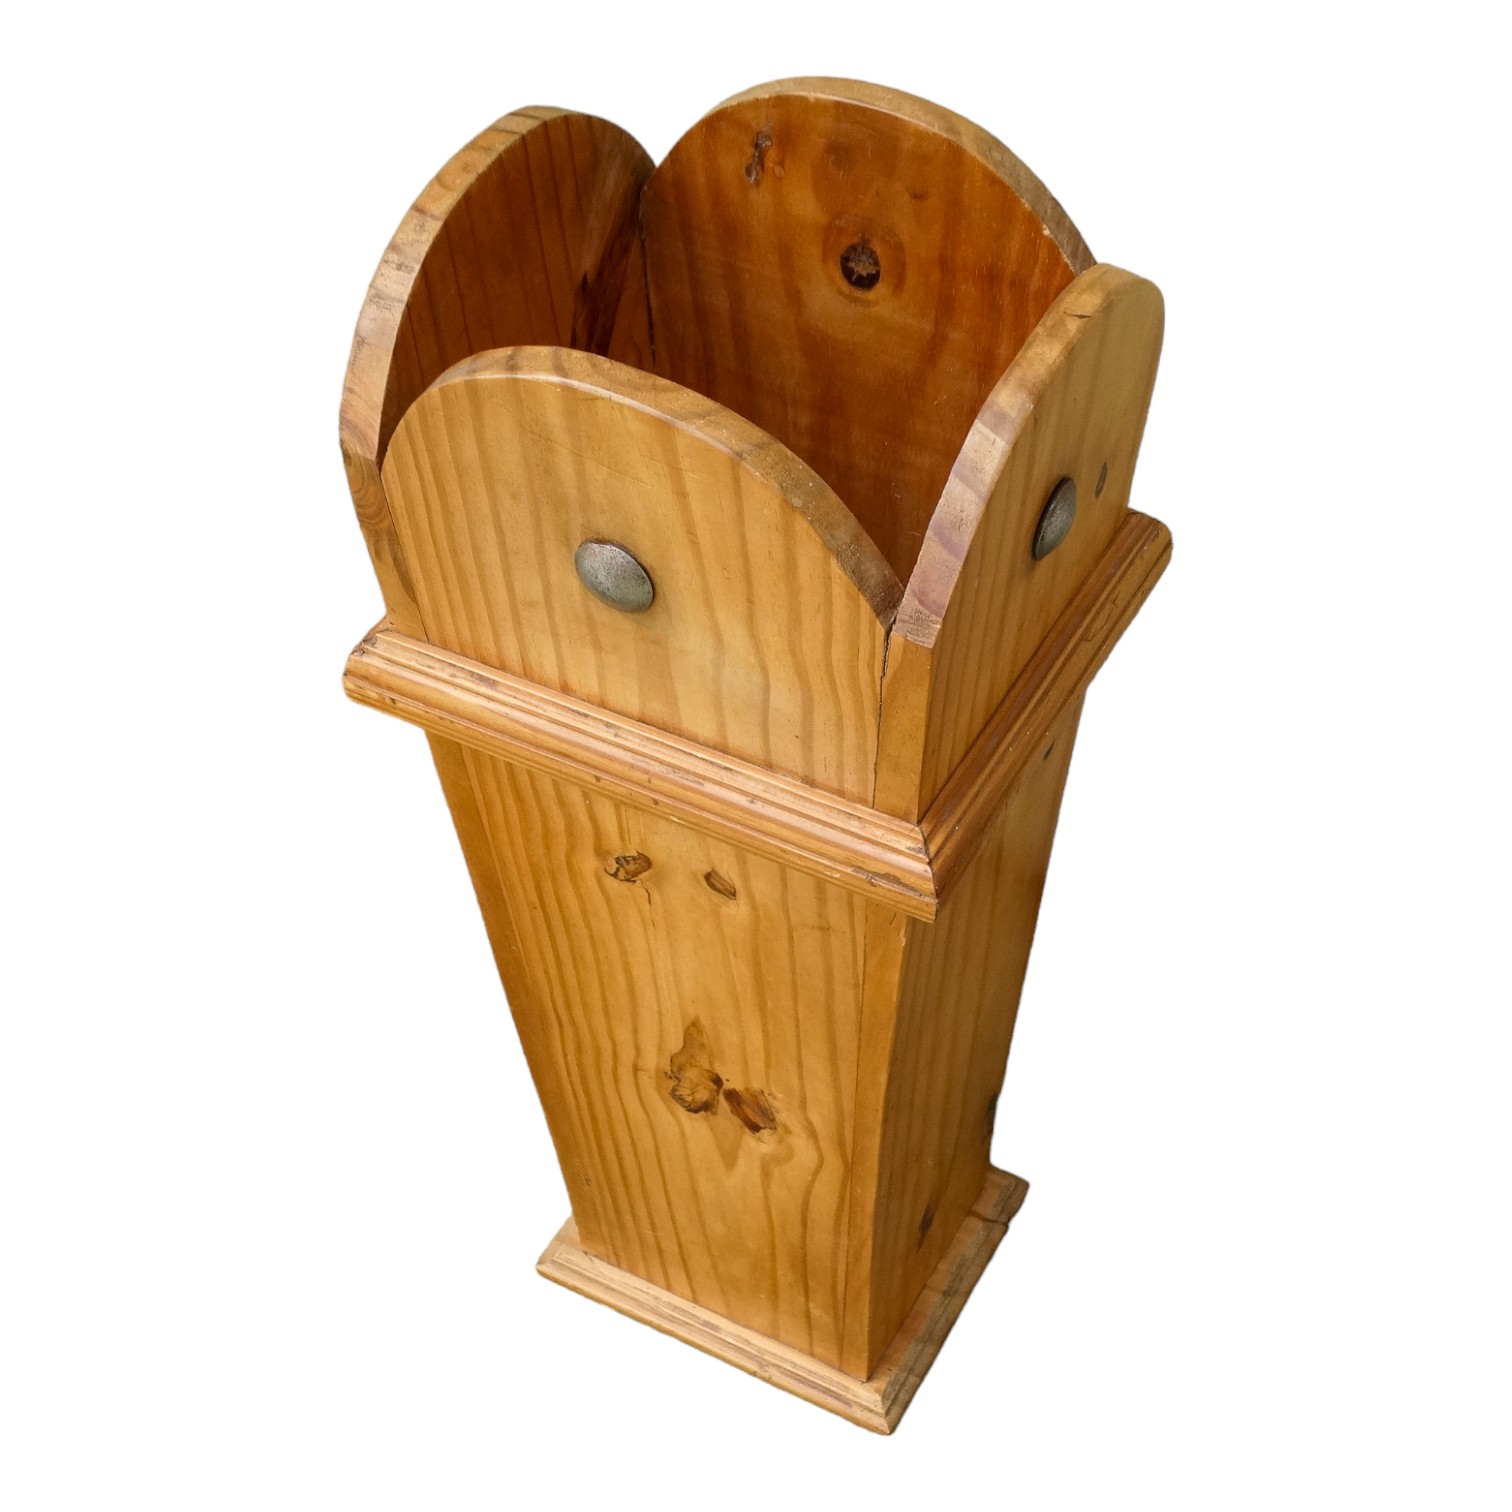 A 20th century pine umbrella stand - of rectangular tapering form and decorated with a shaped top - Image 3 of 4